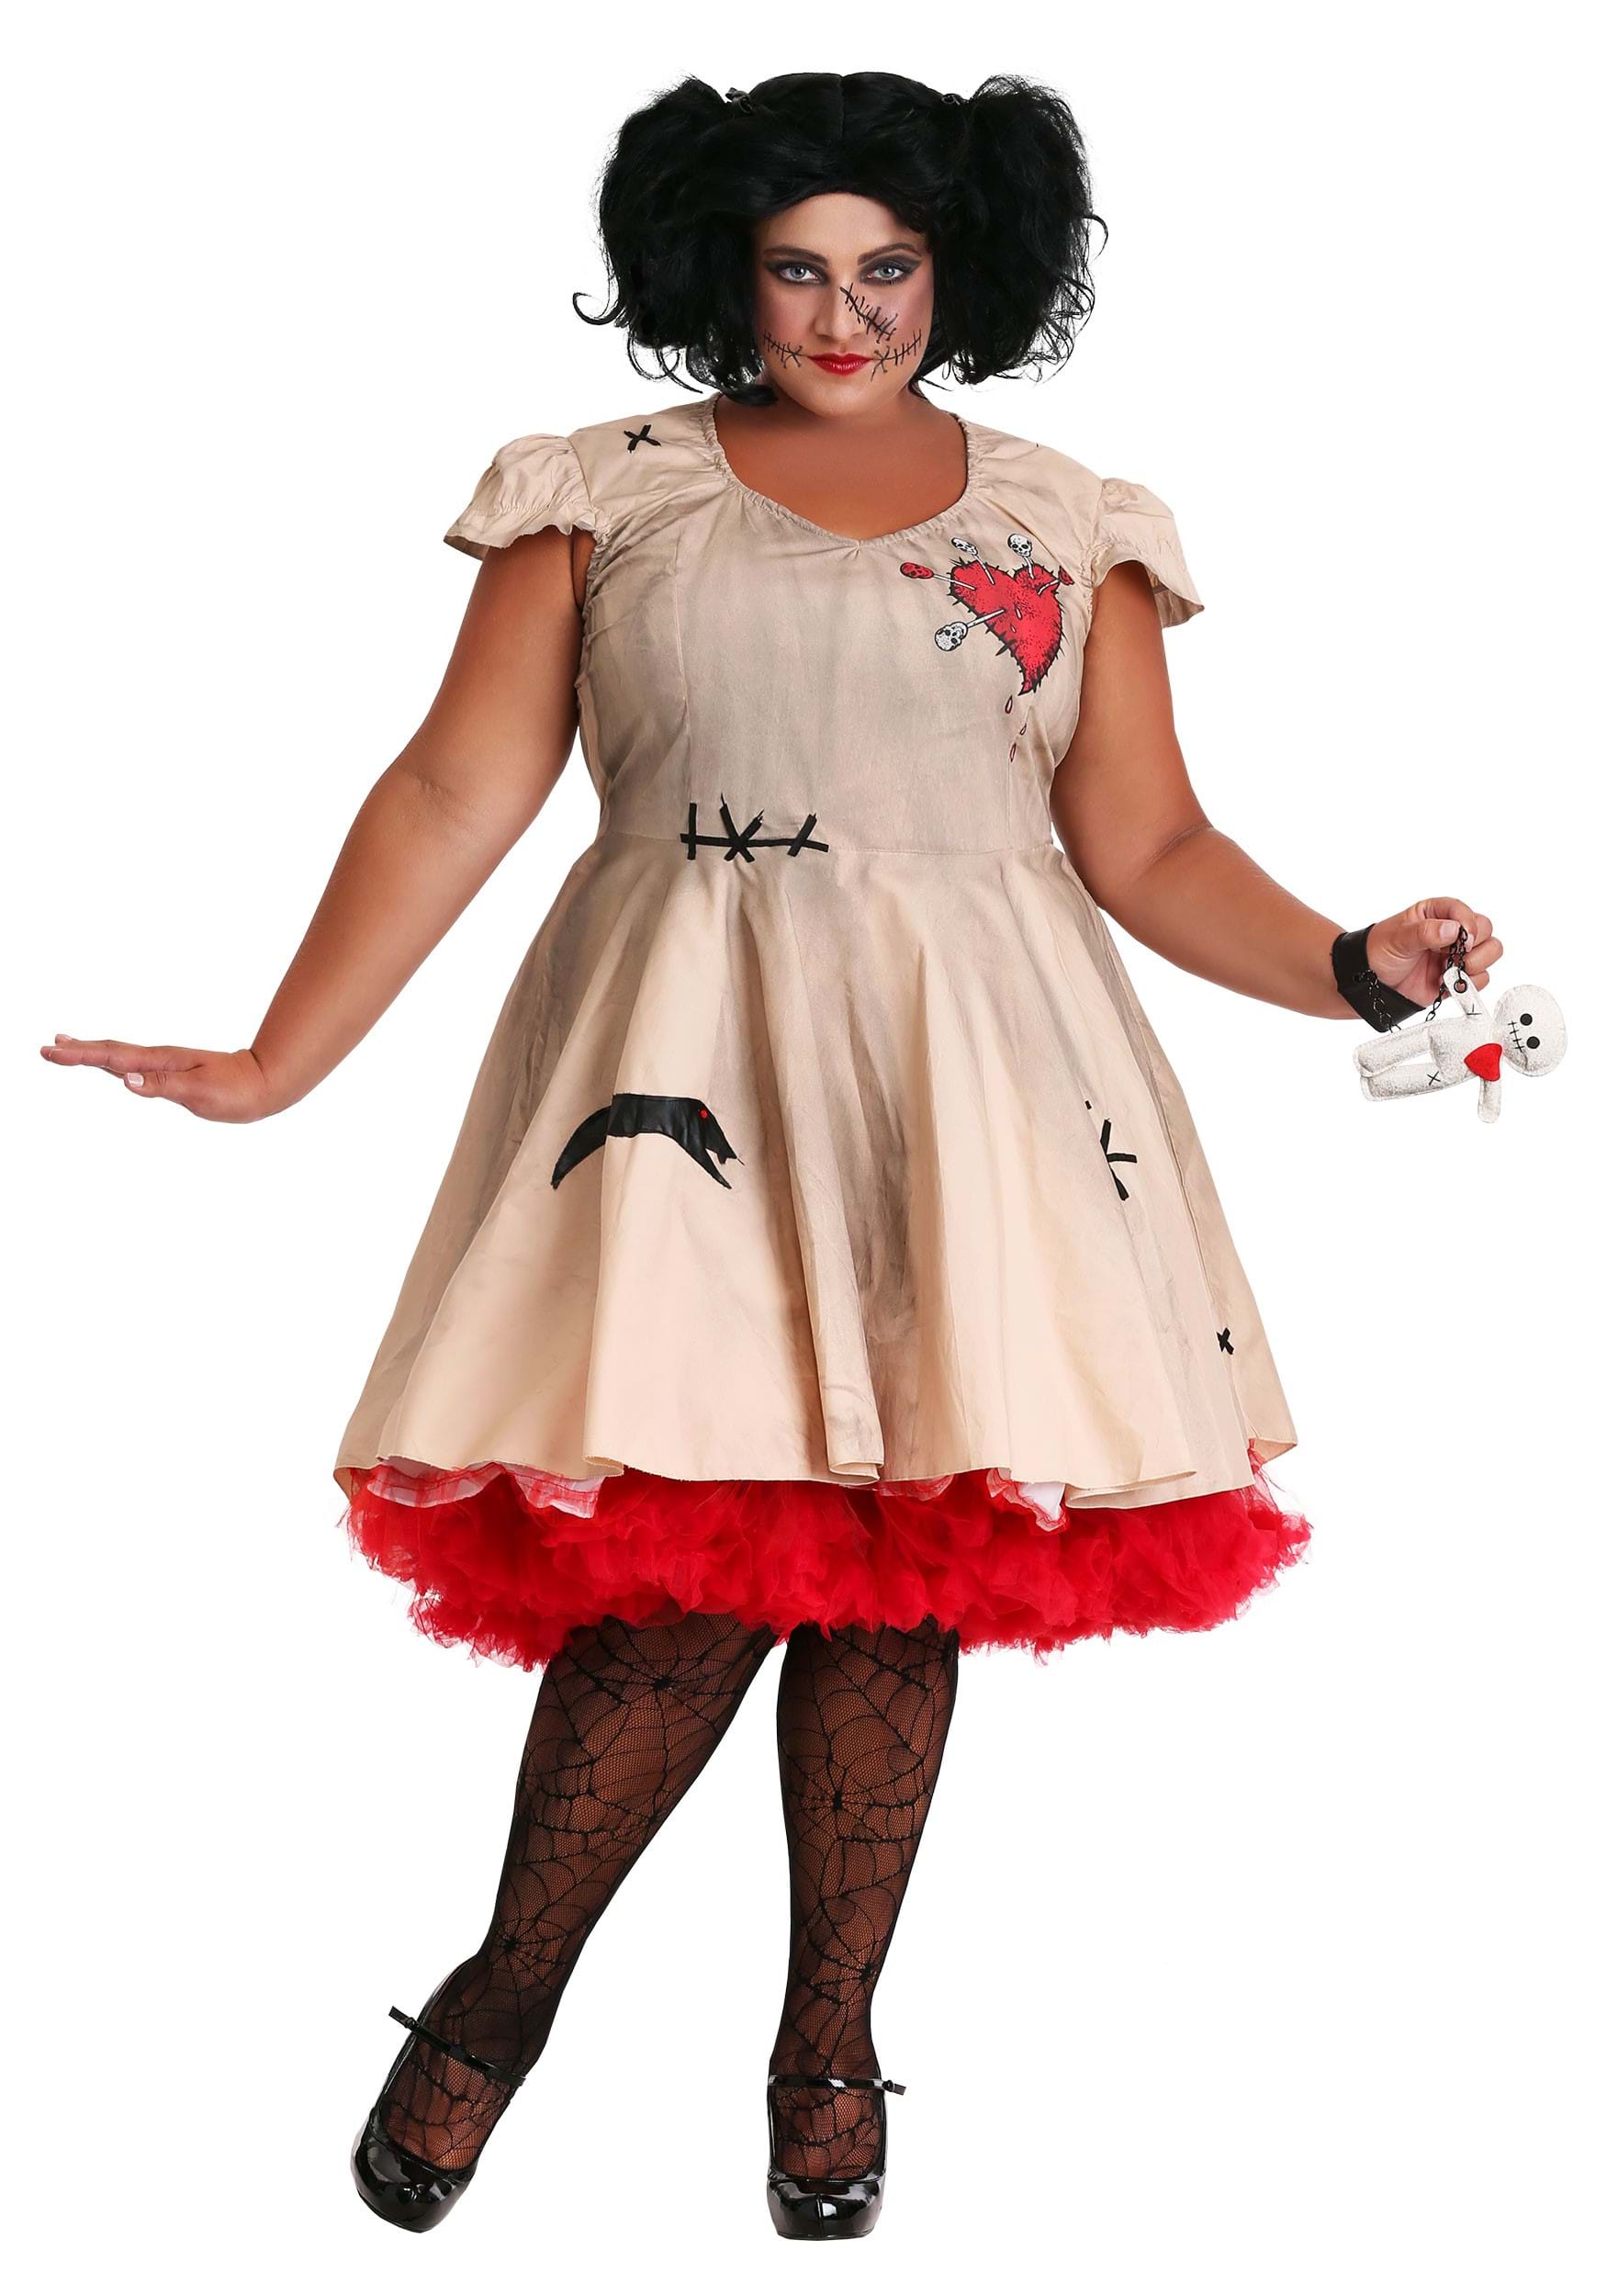 Photos - Fancy Dress Seeing Red Inc. Plus Size Voodoo Doll Costume for Women | Scary Costumes R